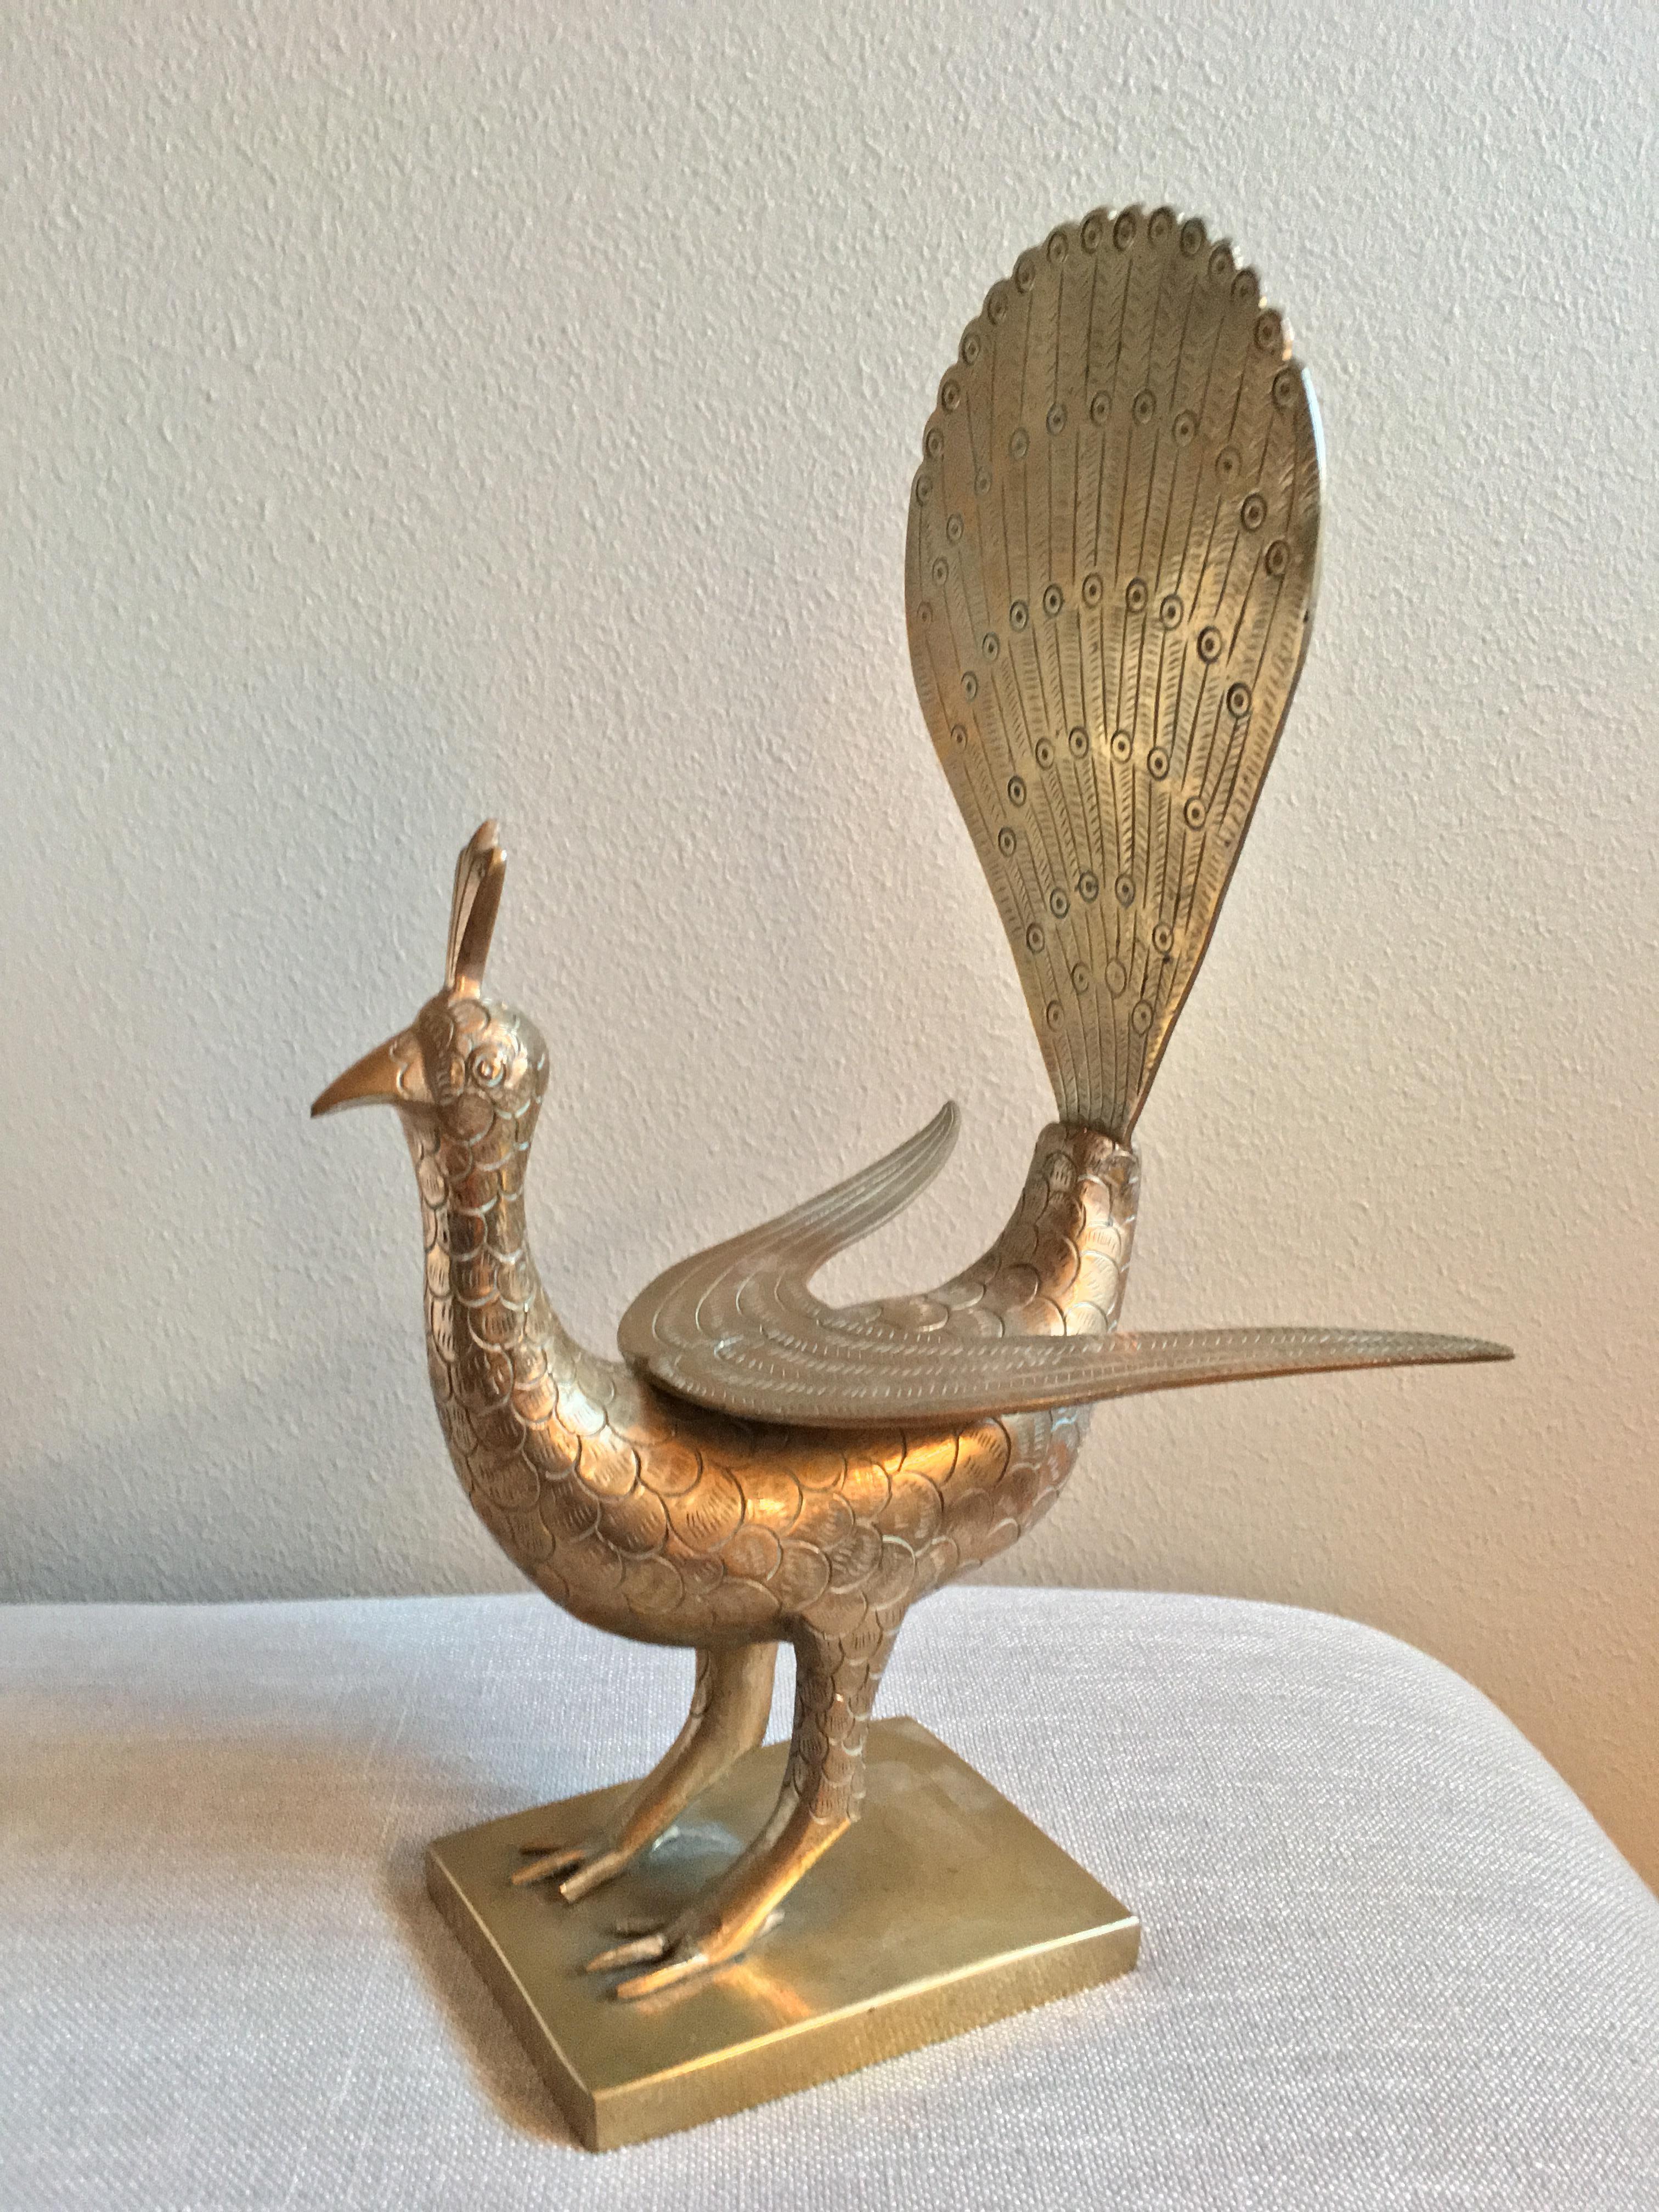 One-of-a-kind solid-brass peacock with definite mid-20th-century style, and a bit of attitude to go along! This piece is hand-carved and richly detailed. It is well-balanced, well-weighted, and structurally sturdy. The images show the rich luster of